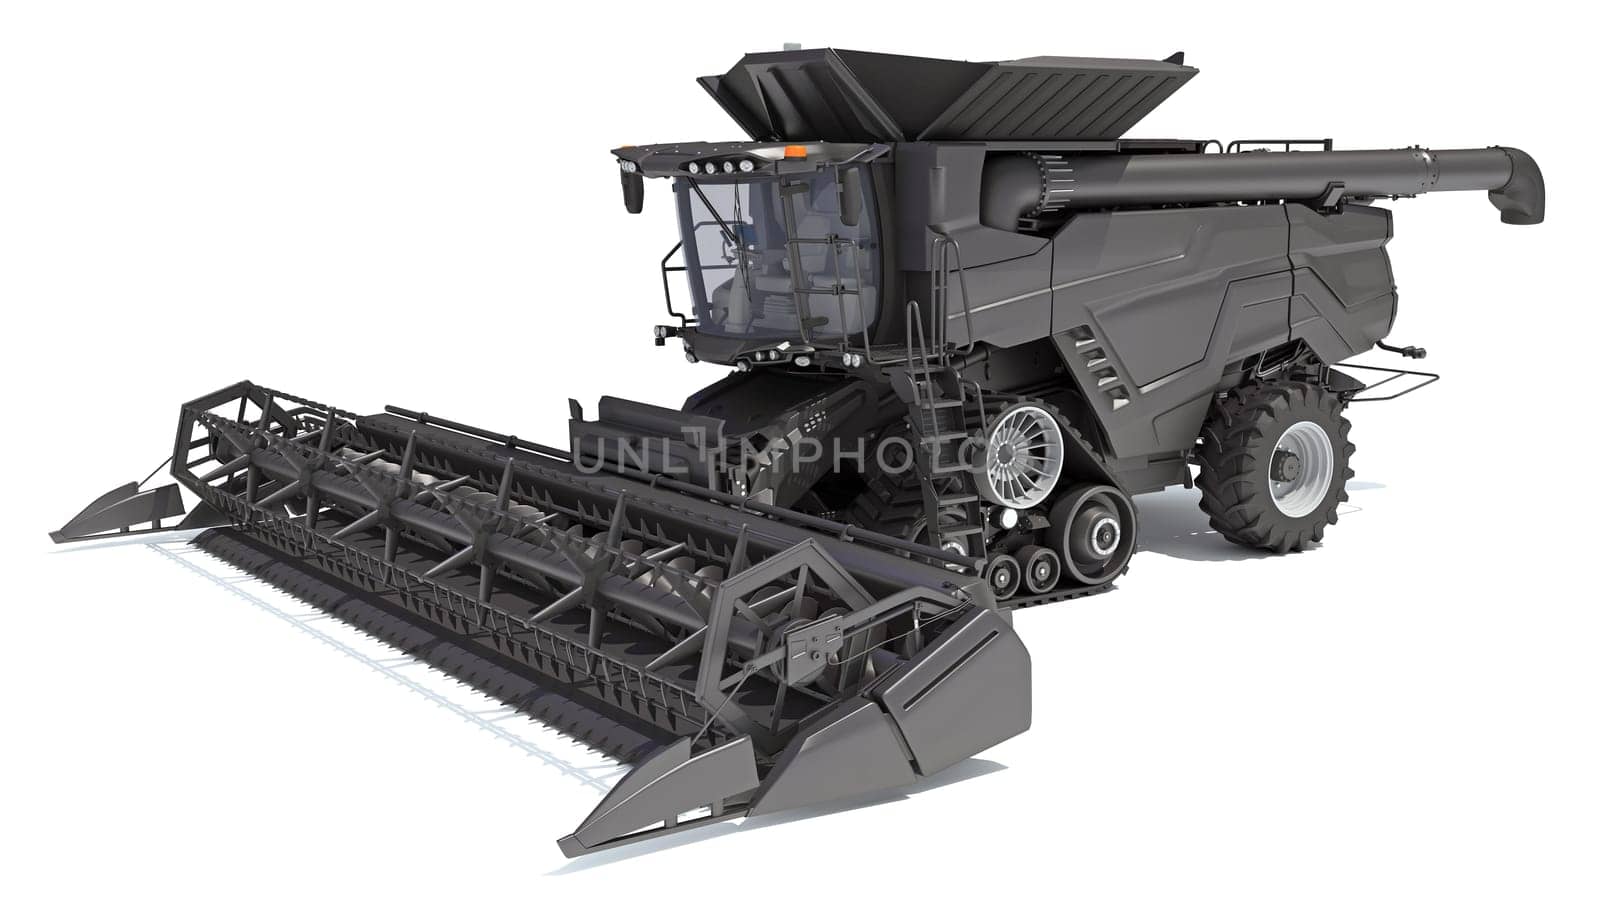 Combine Harvester farm equipment 3D rendering on white background by 3DHorse